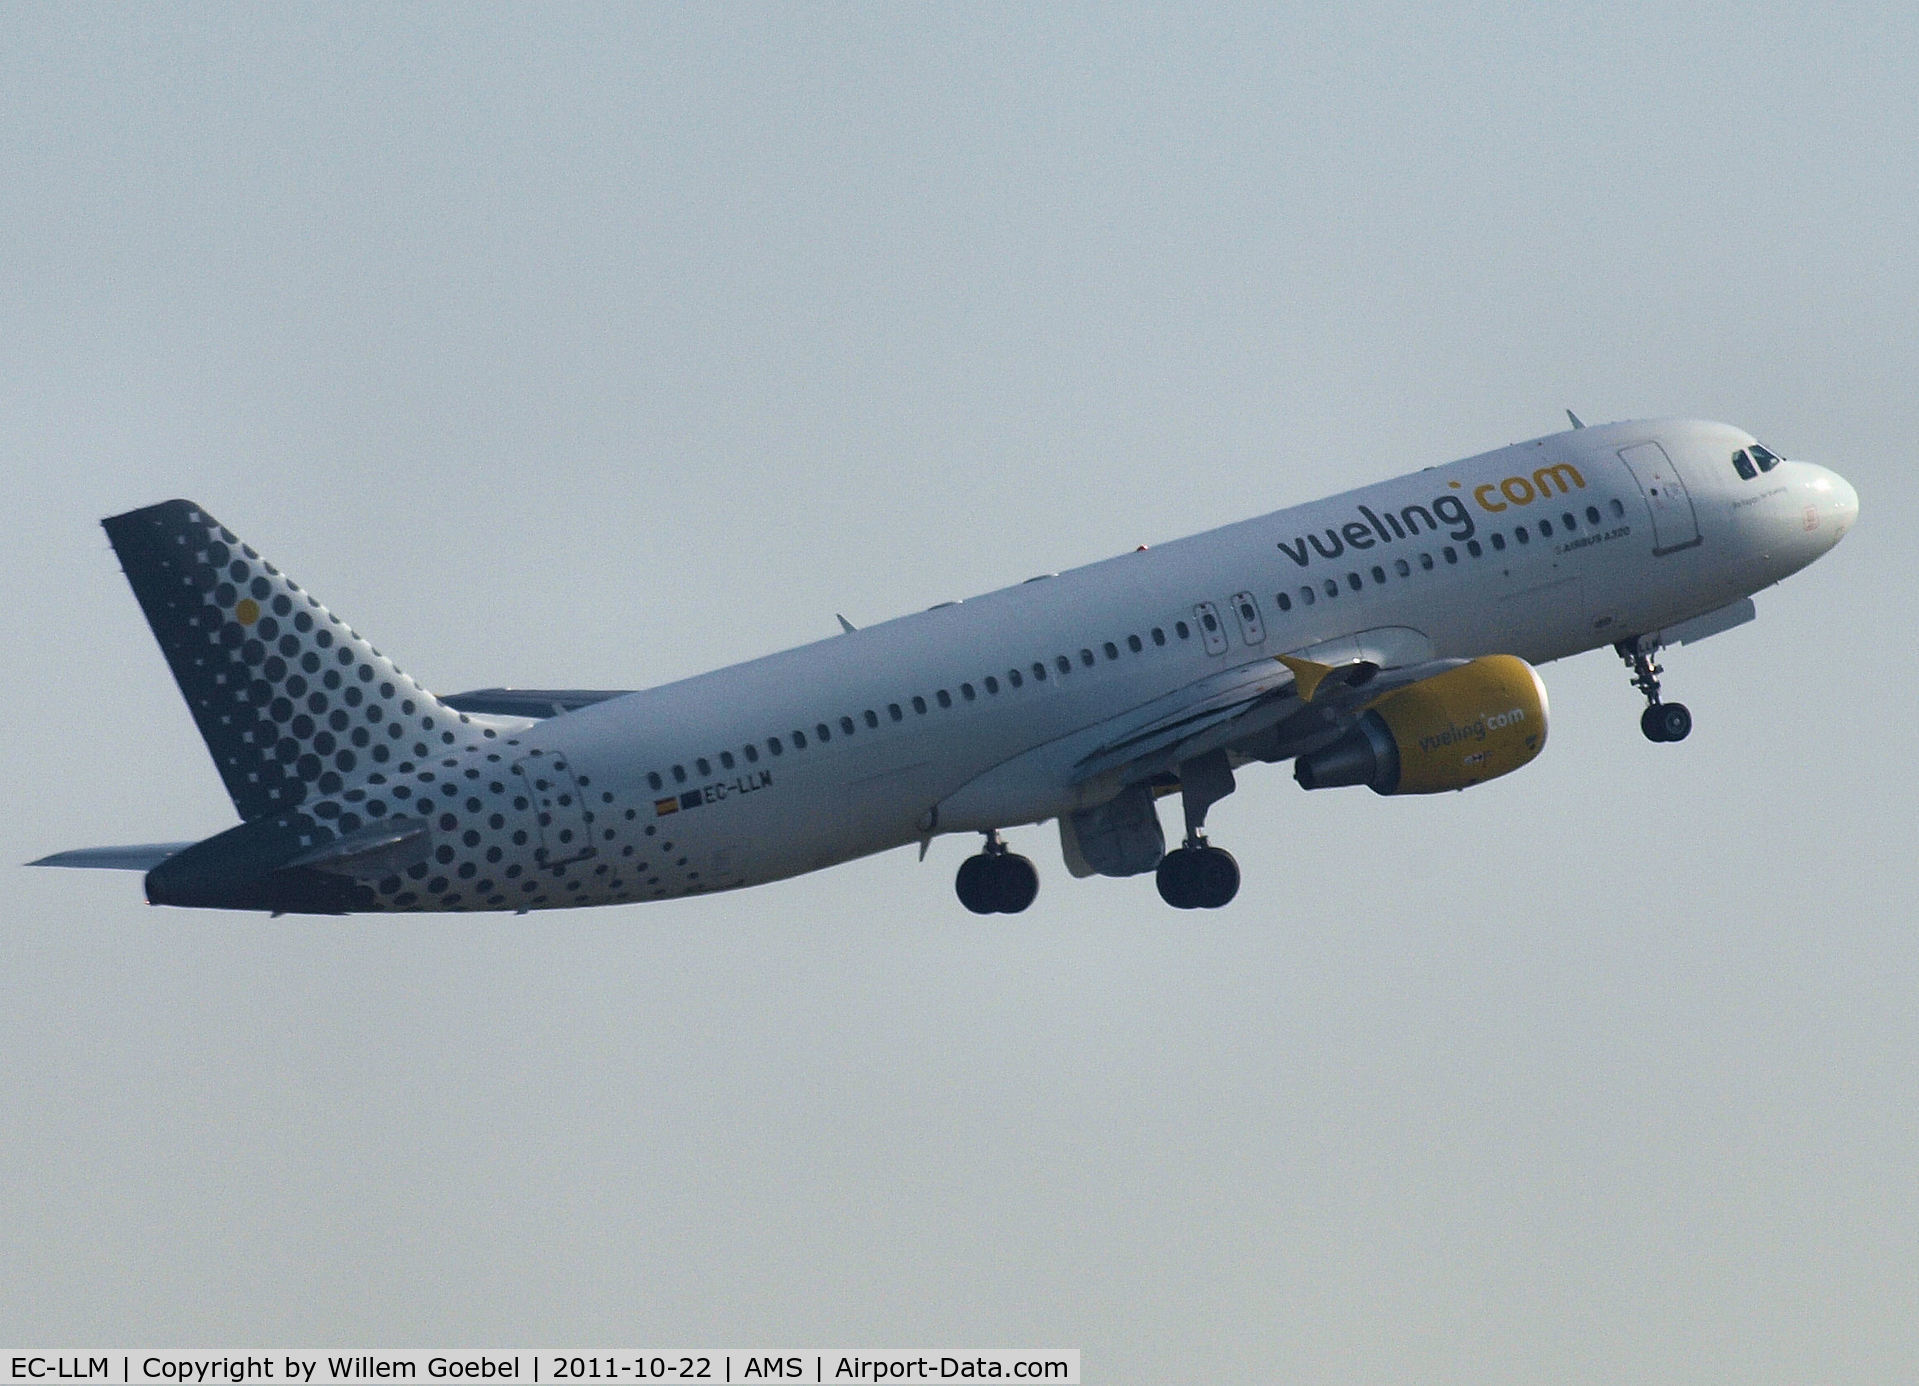 EC-LLM, 2011 Airbus A320-214 C/N 4681, Take off from Schiphol Airport